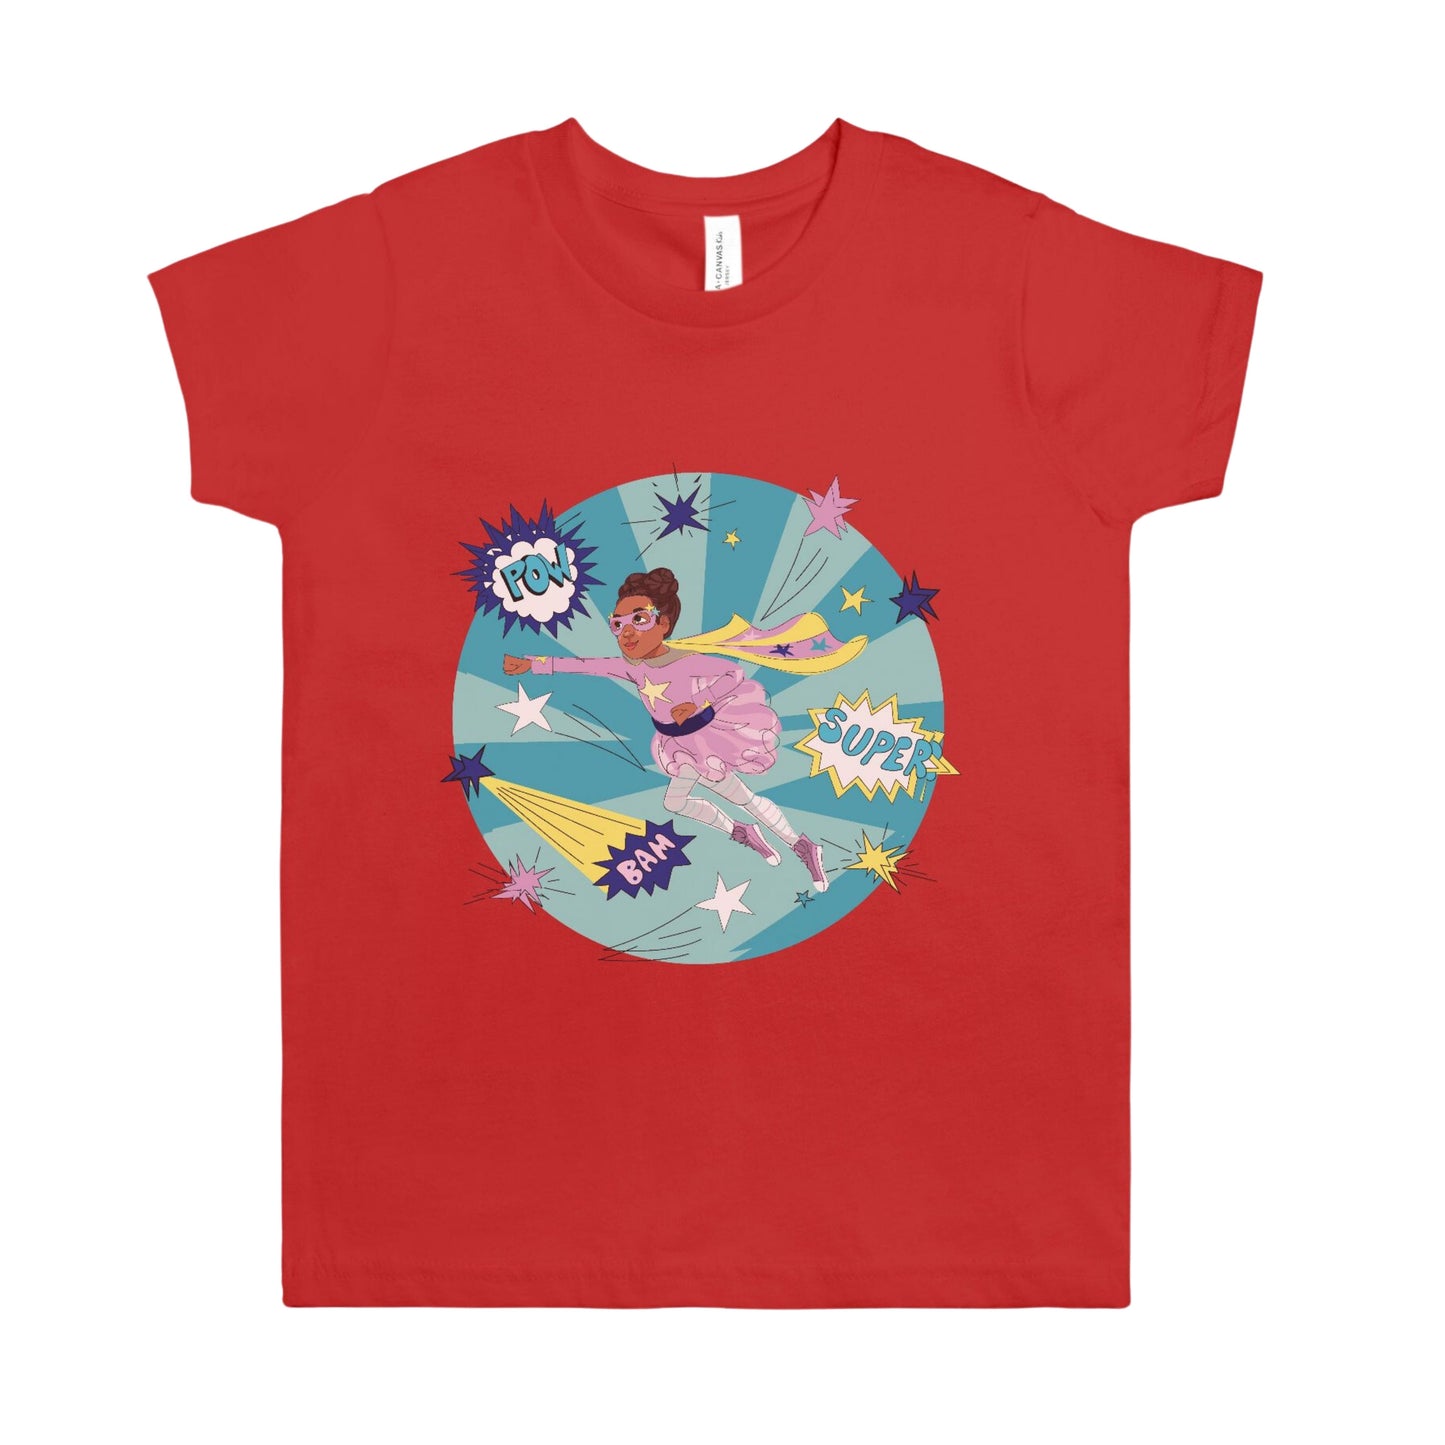 Black Supergirl Shirt Graphic Tee for Kids